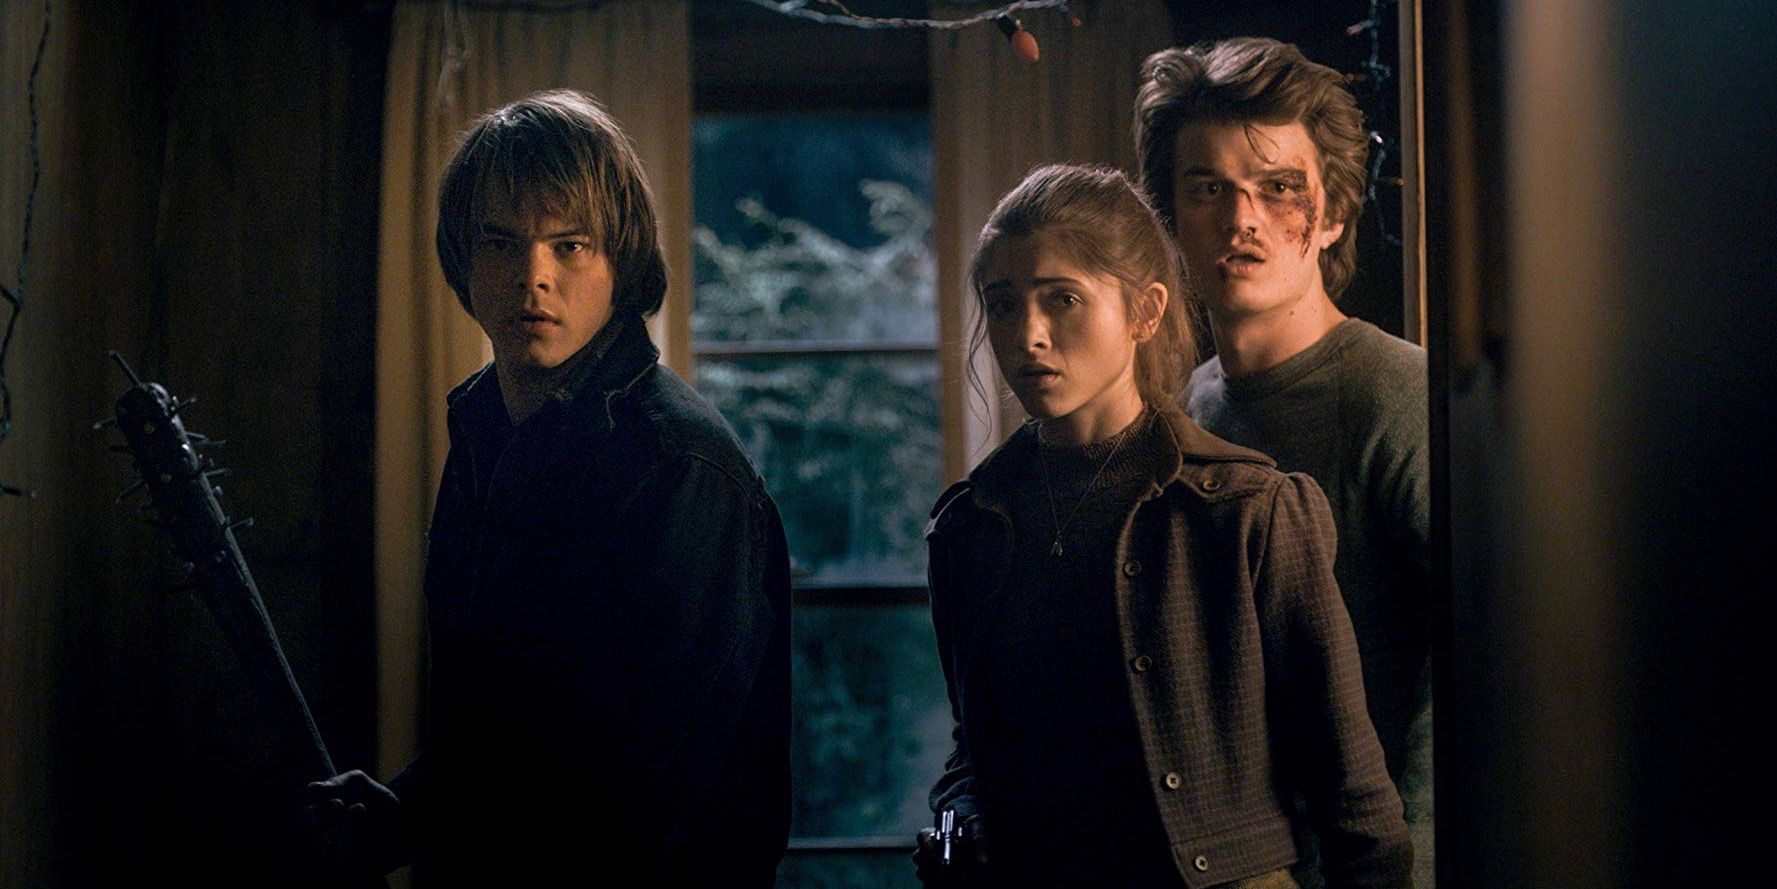 The 5 Best (& The 5 Worst) Episodes Of Stranger Things (According To IMDb)